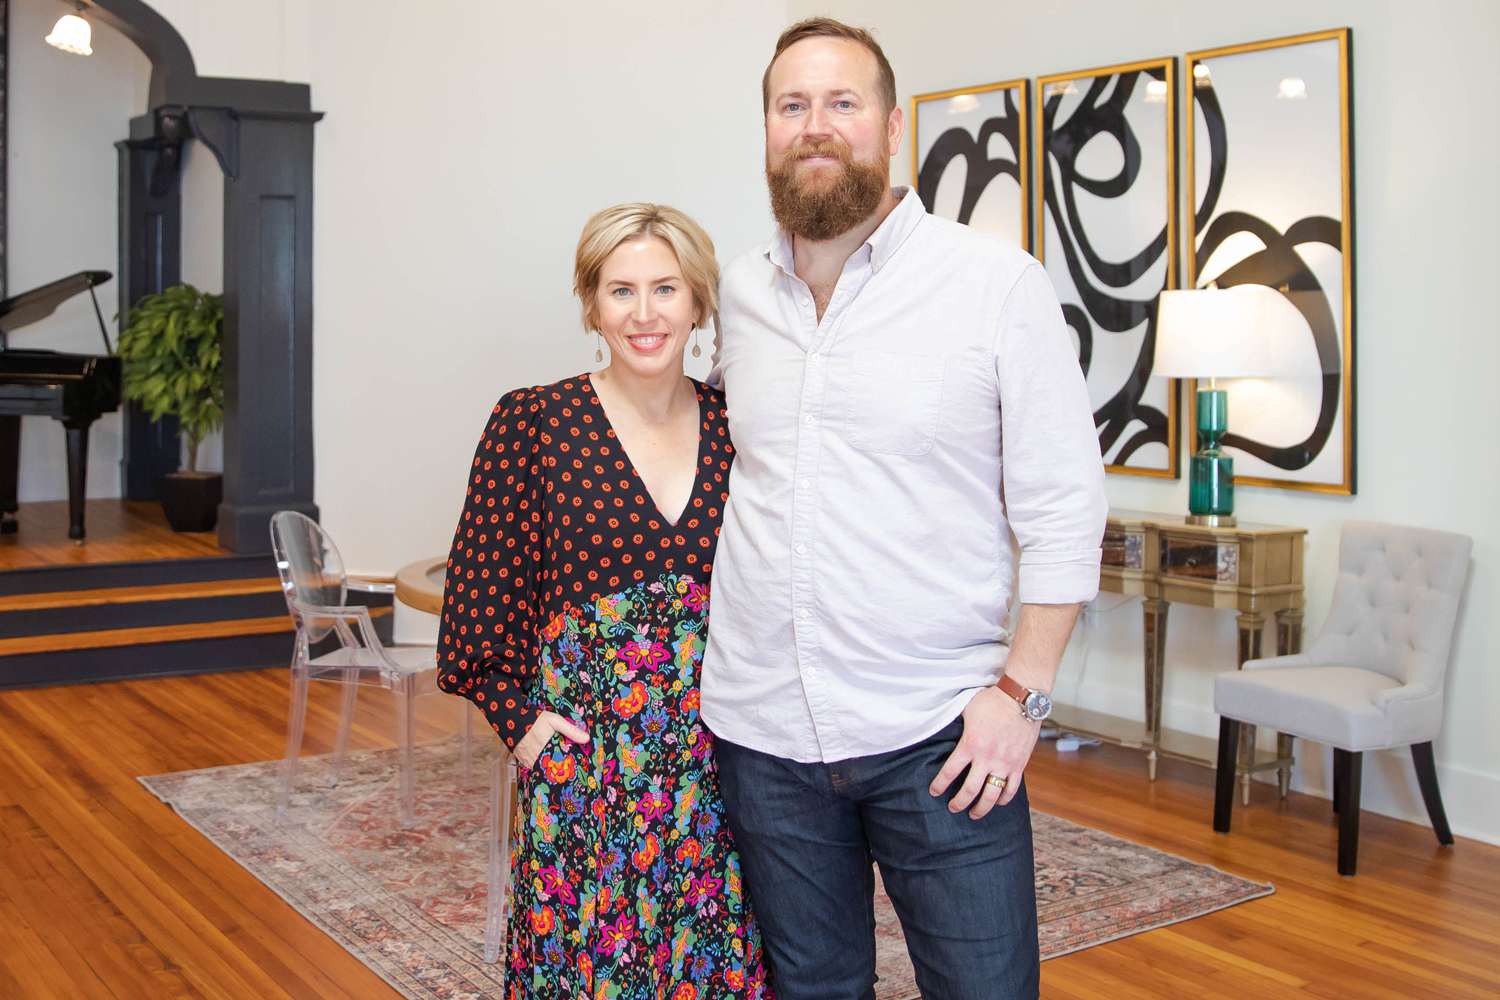 Ben and Erin Napier Gave PEOPLE a Sneak Peek Behind the Scenes of the Next “Home Town Takeover ”(Exclusive)